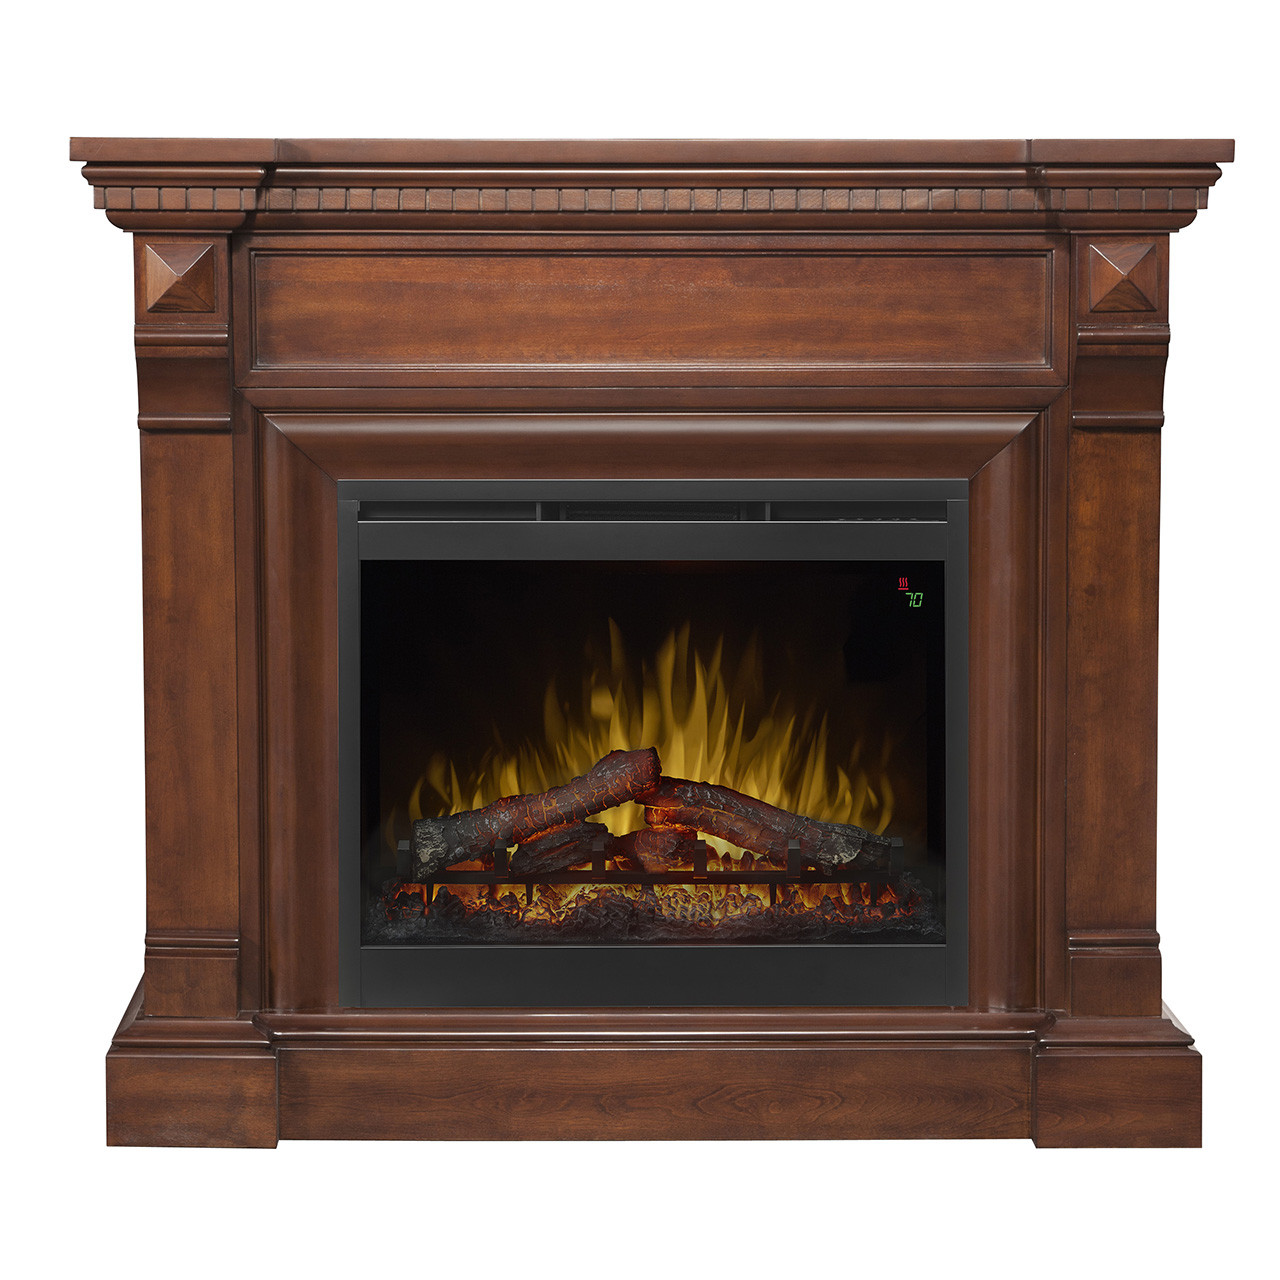 Electric Fireplace And Mantel
 Electric Fireplaces Fireplaces Mantels Mantels Dimplex